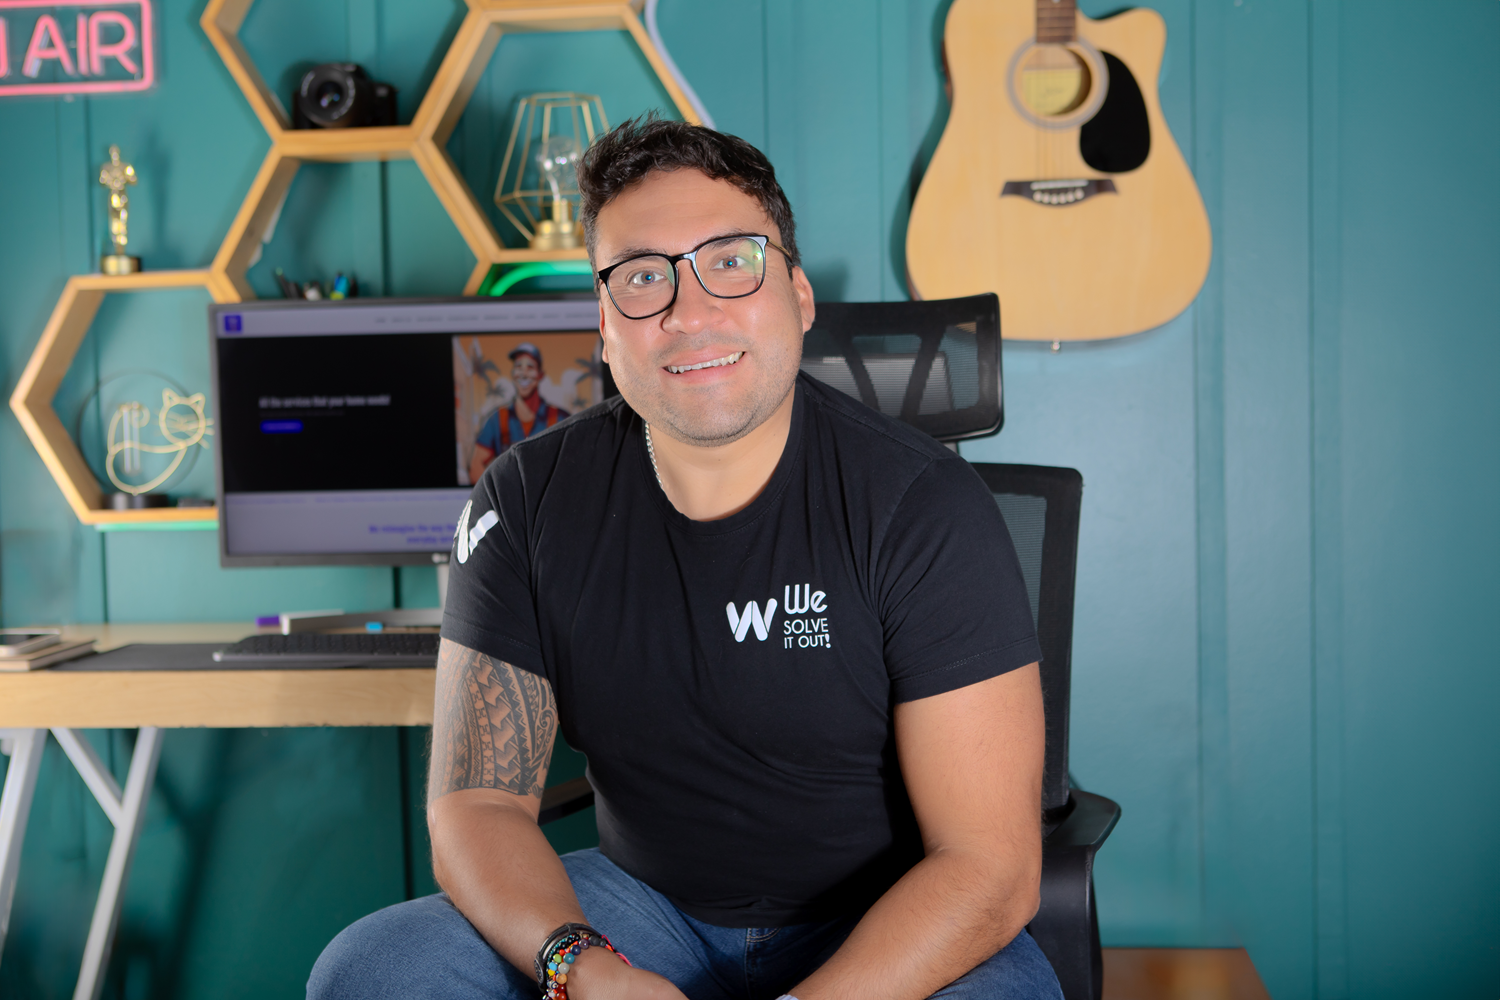 We Solve it Out: The Revolution of Home Services with Sebastián Reyes